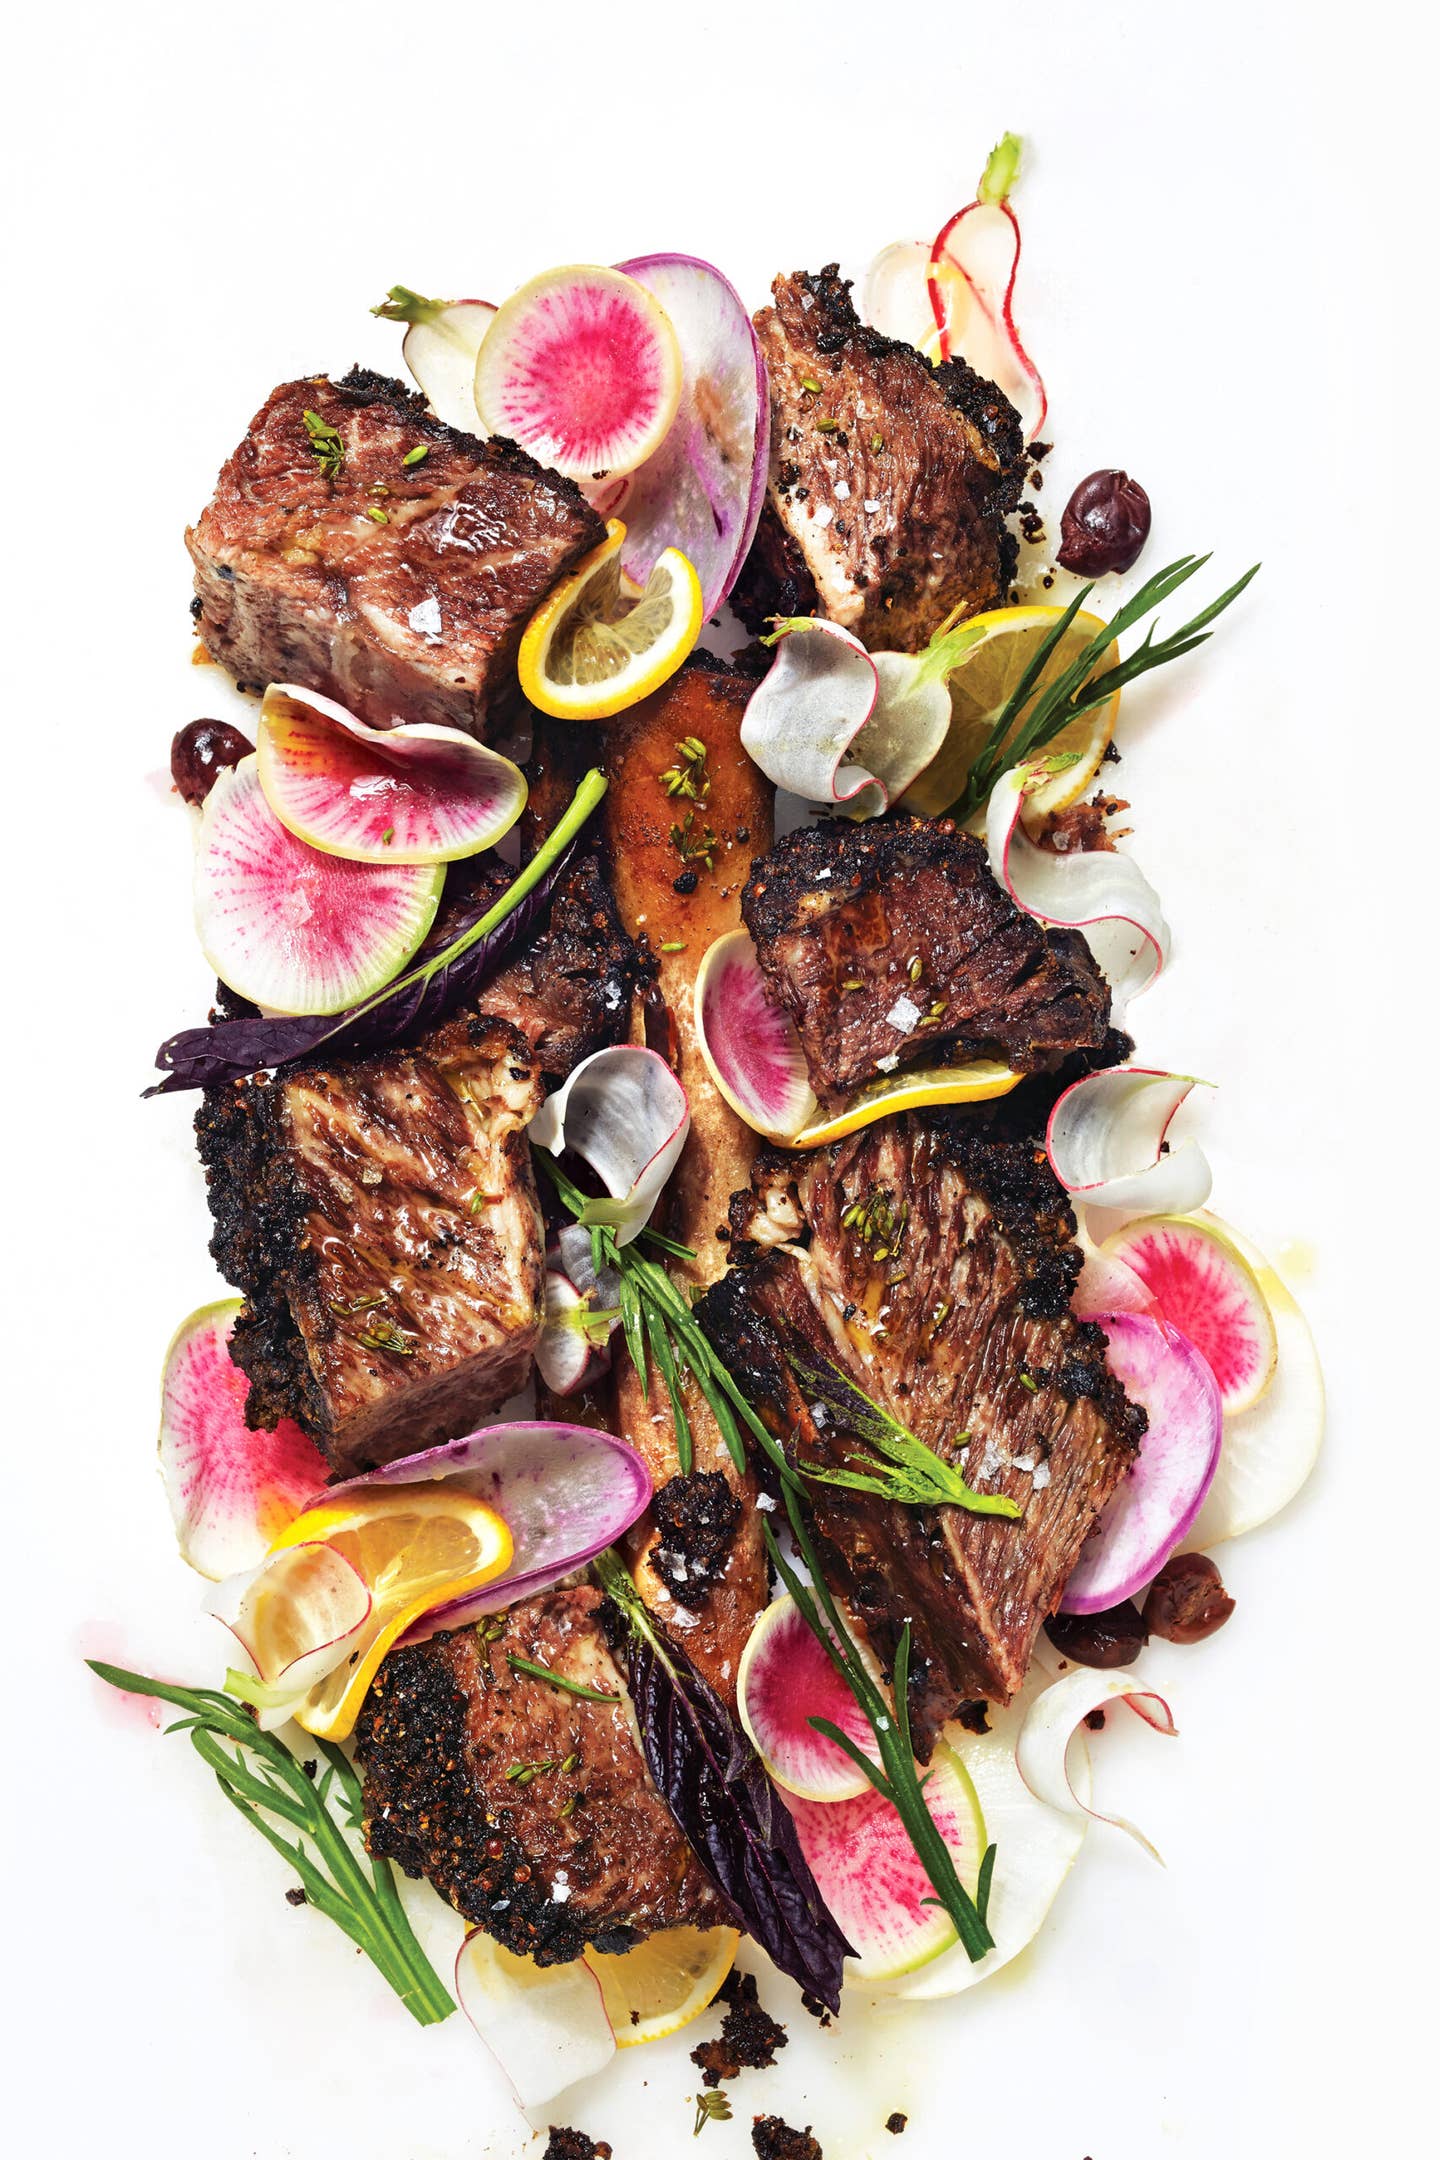 Justin Smillie’s Peppercorn-Crusted Short Ribs with Lemon, Olives, and Radishes